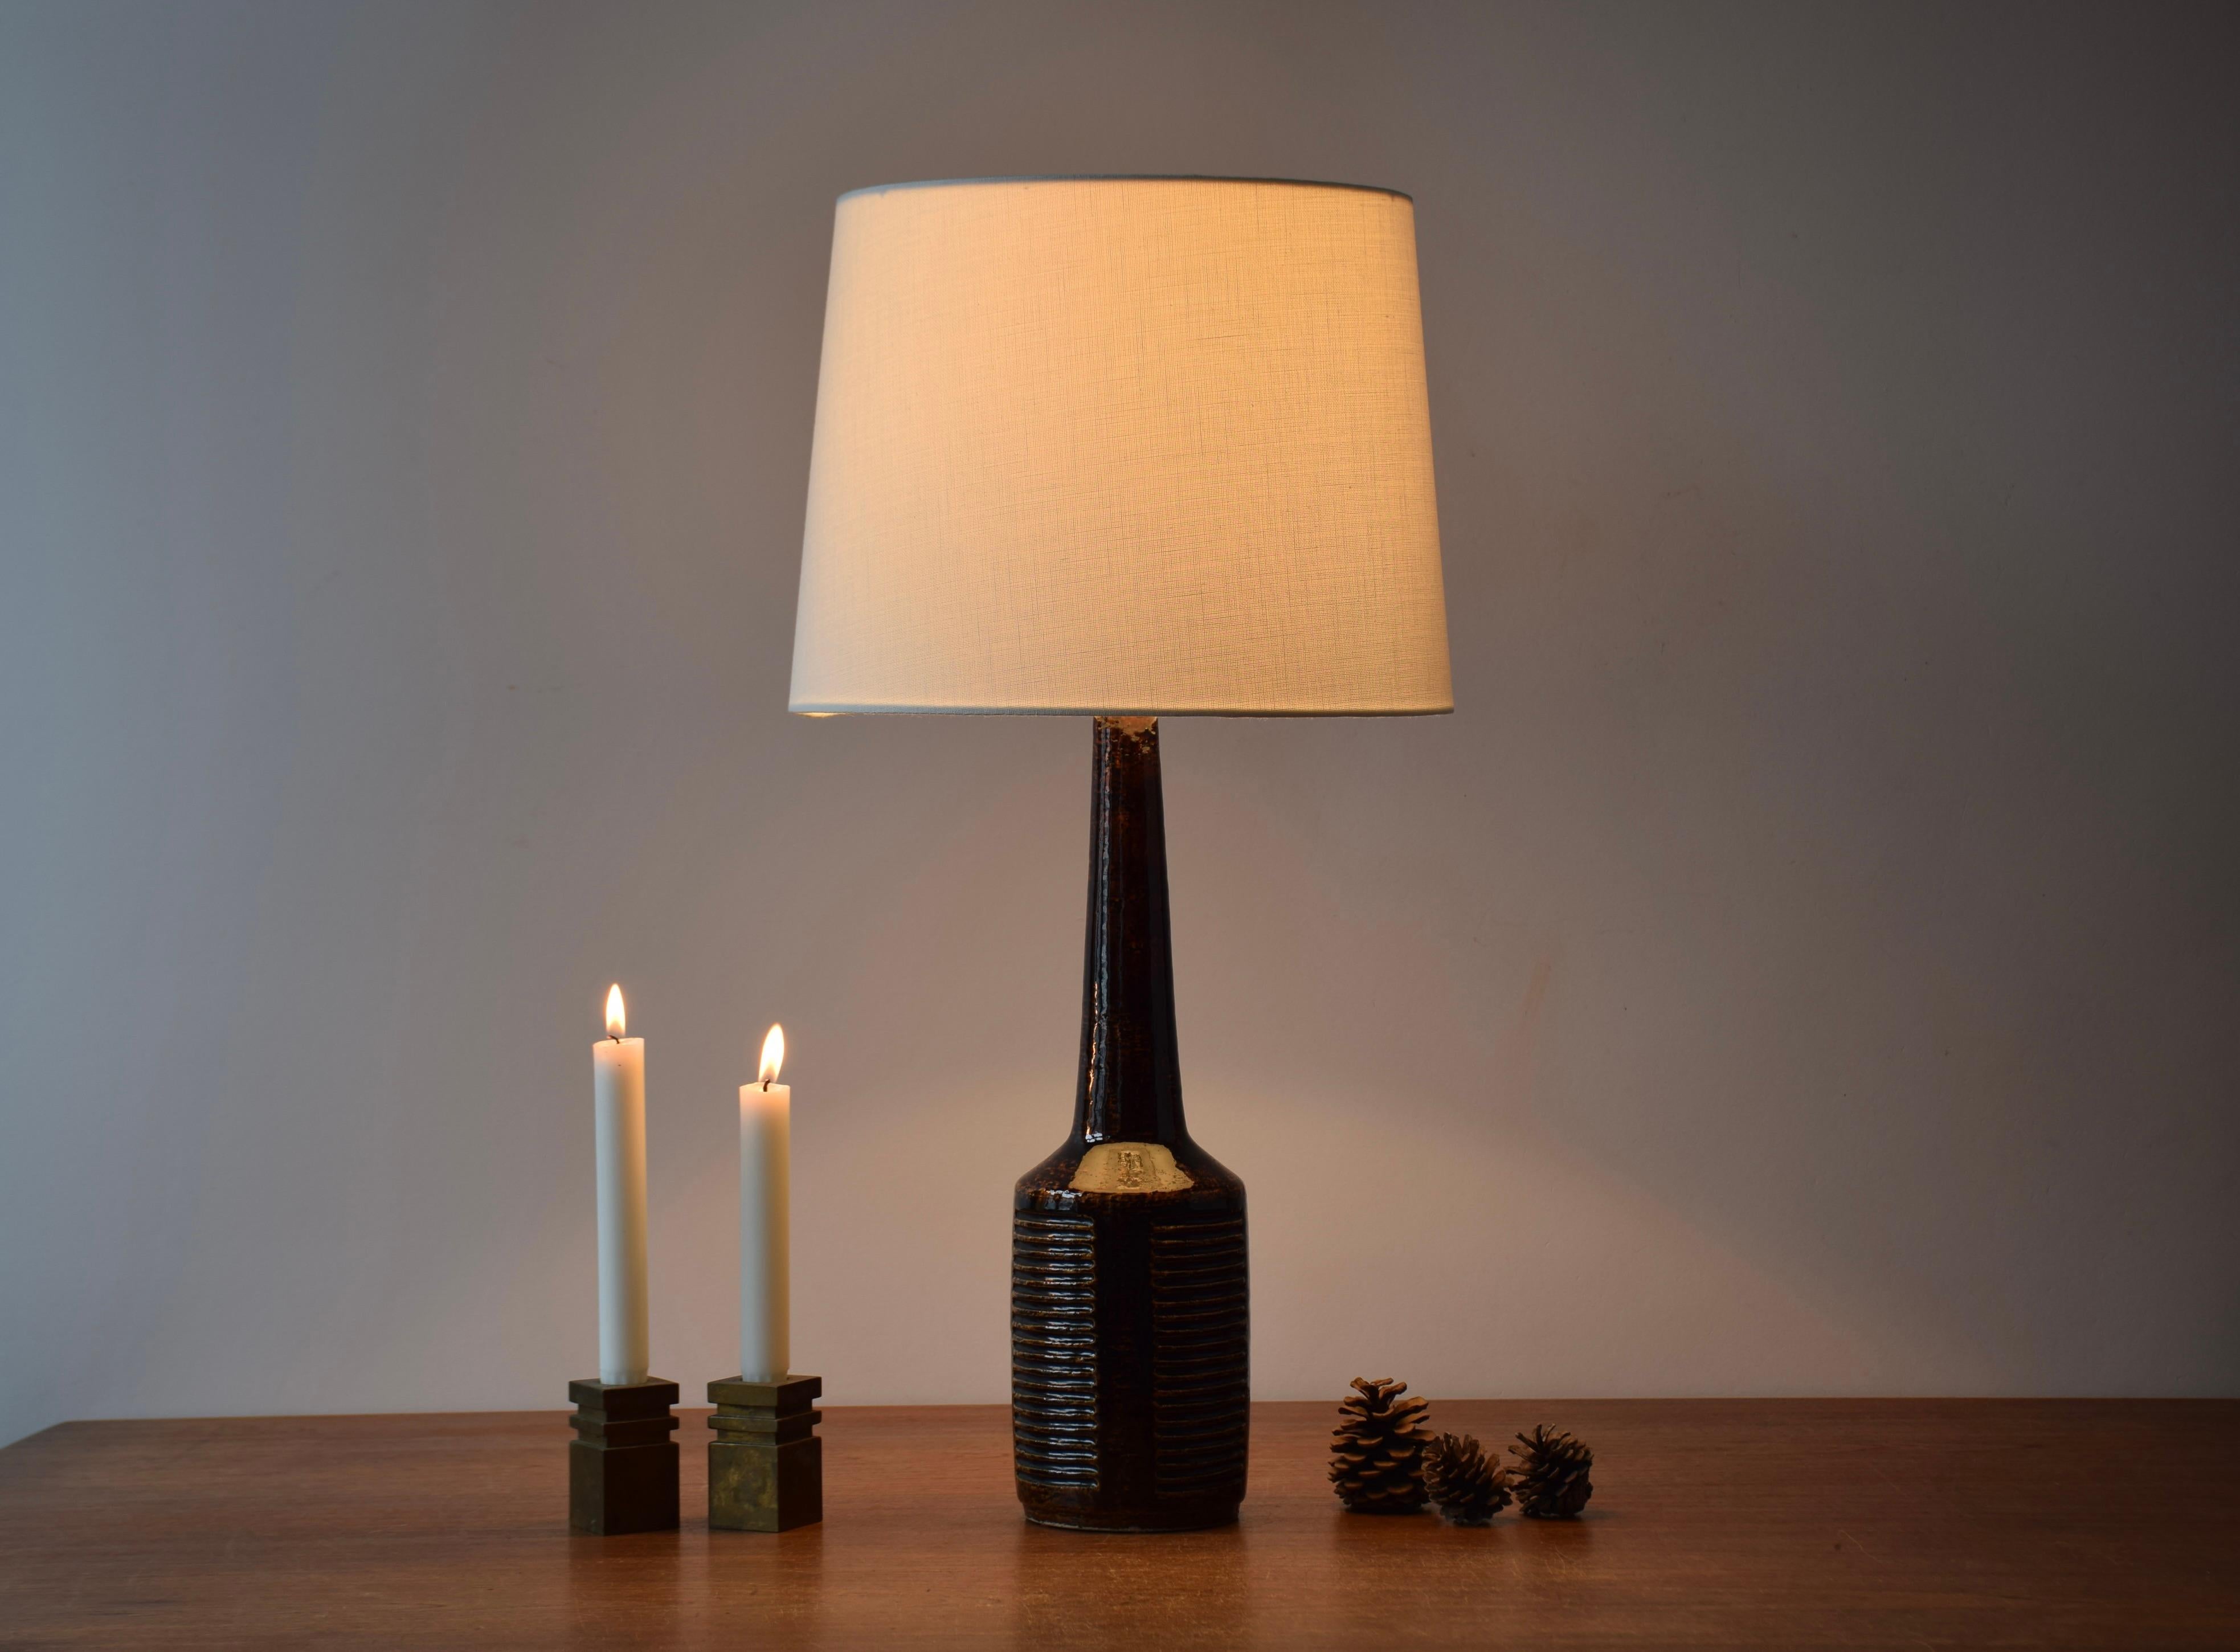 Midcentury tall table lamp from Danish Palshus.
The lamp was designed by Per Linnemann-Schmidt and produced, circa 1960s.
It has a warm dark brown glaze and is made with chamotte clay which gives a rough and vivid surface. It has an imprinted stripe